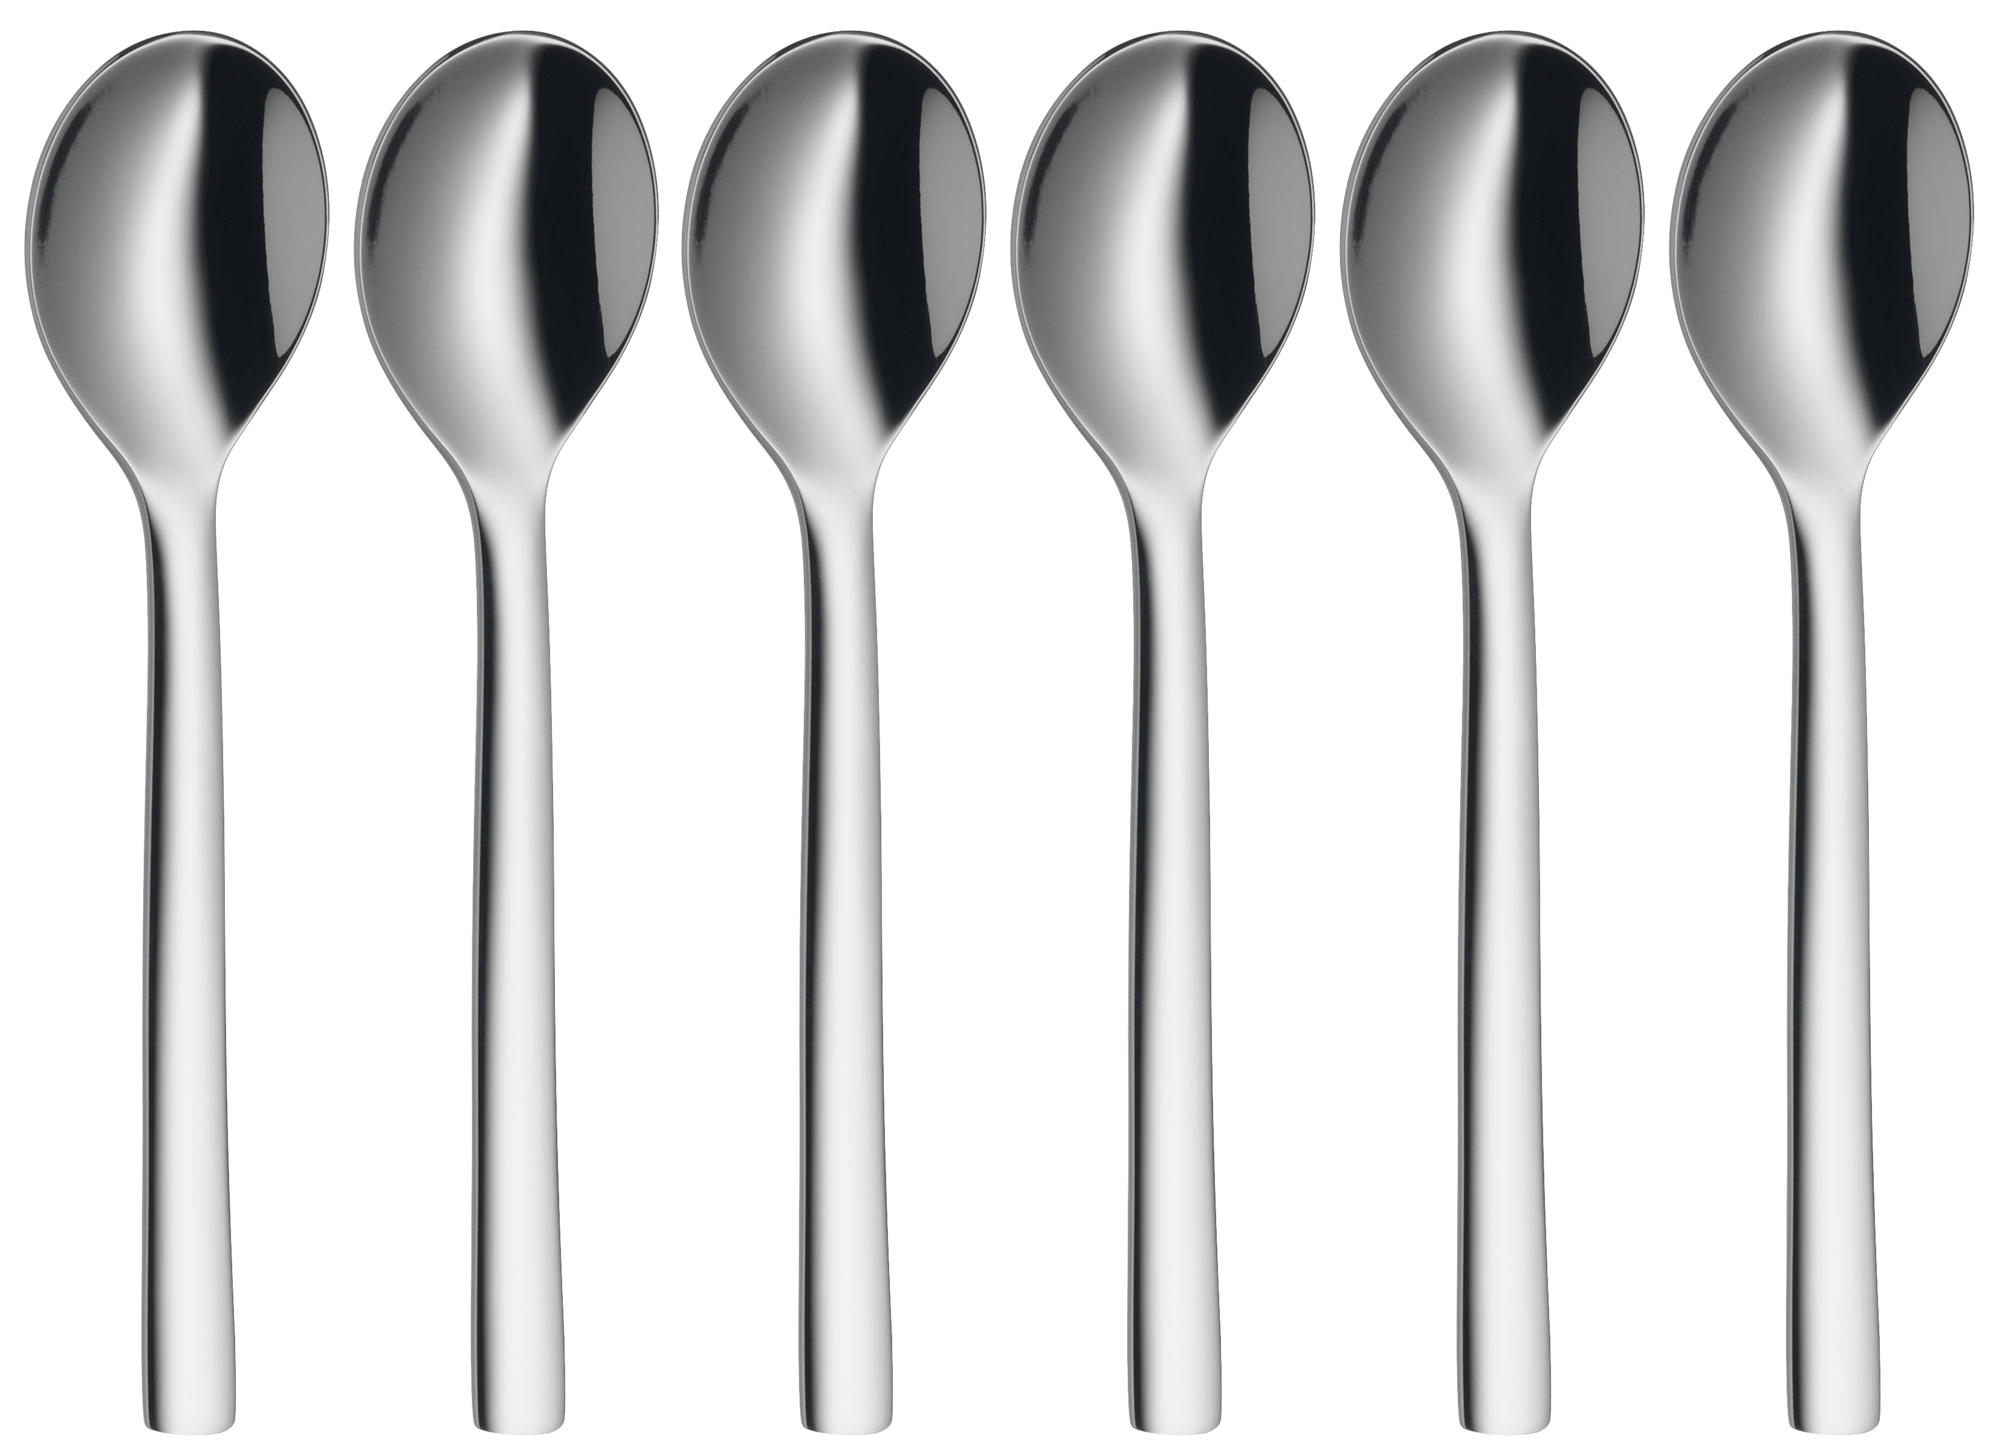 8 x 1 x 8 cm 6 Units WMF Lyric Polished Espresso Spoon Set Cromargan Protect Set of 6 Stainless Steel Very Resistant Dishwasher Safe Silver Steel 